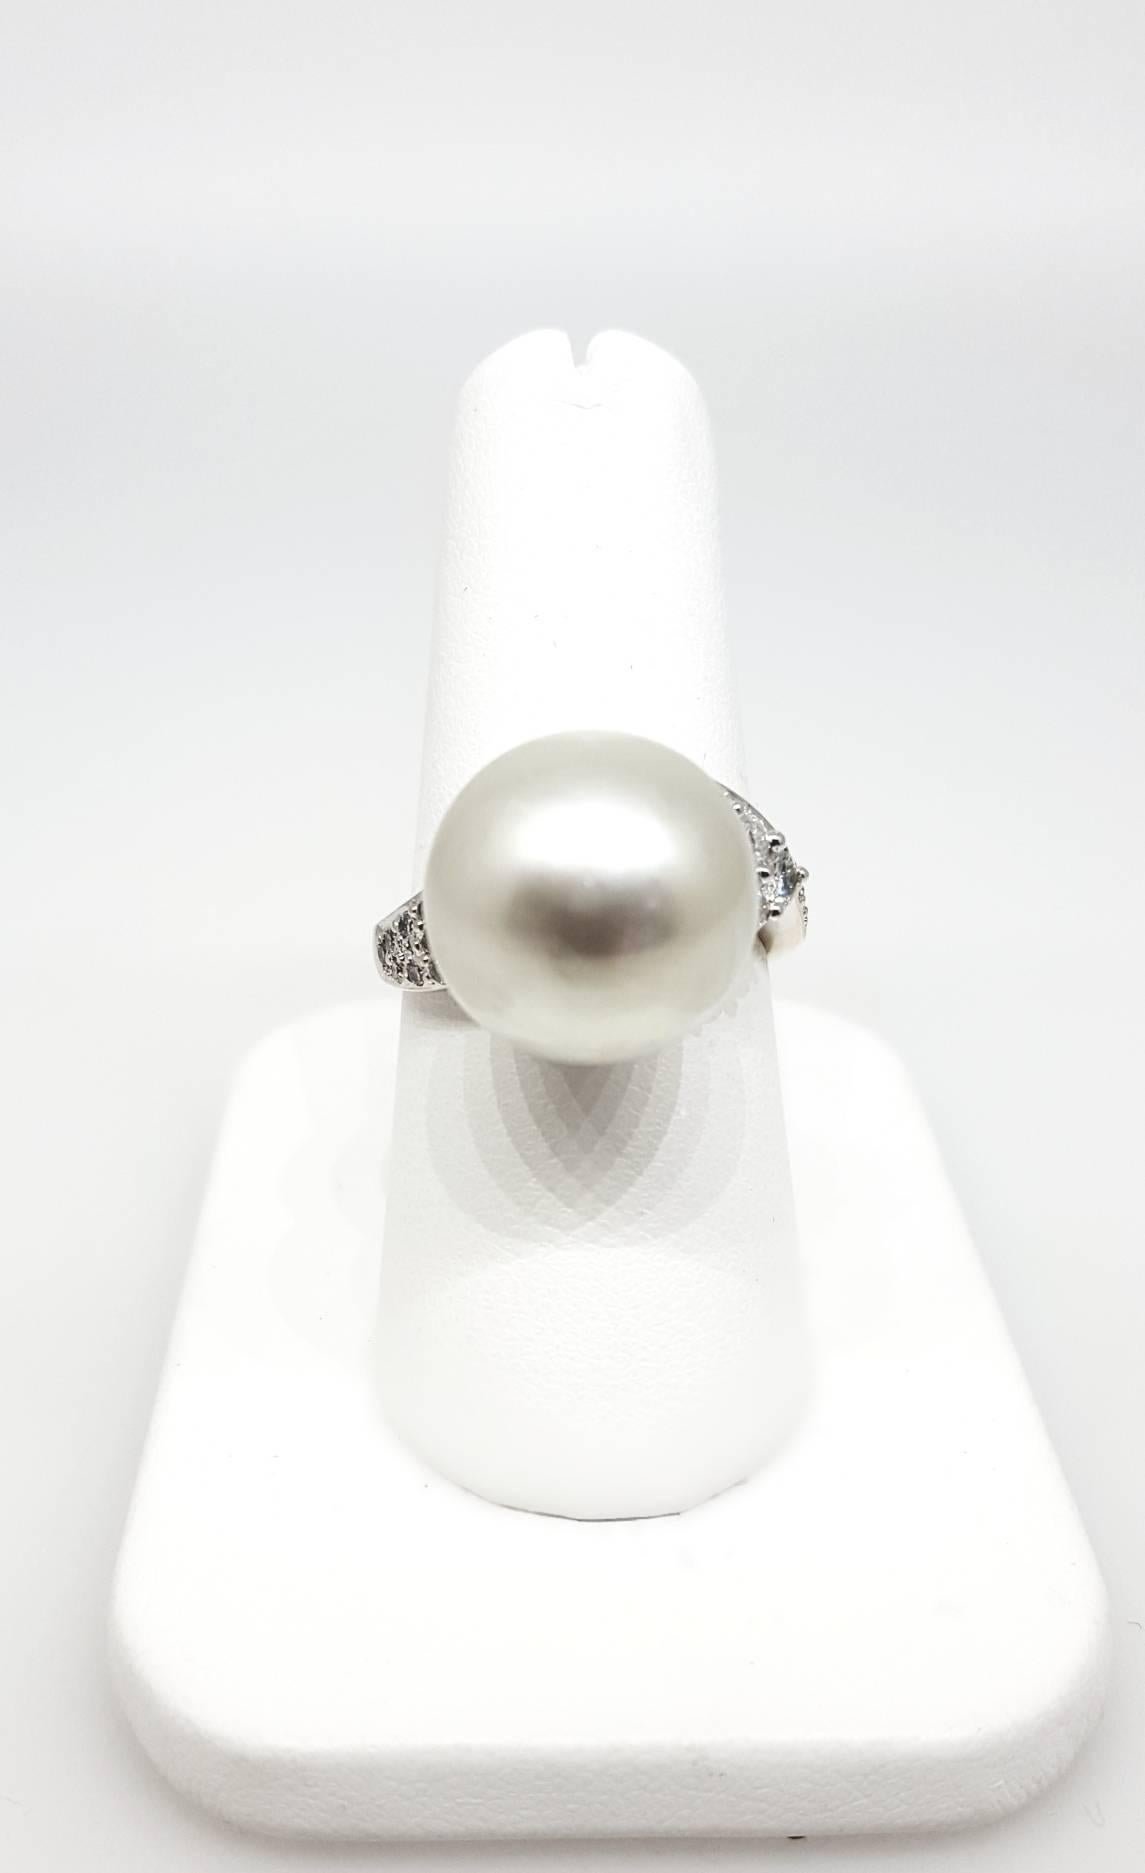 An 18 karat white gold ring set with a south sea pearl that measures 13.68mm. The diamonds are H to I color SI2 clarity and weigh approximately 0.33cttw. The ring is a size 7. 

South Sea Pearl and Diamond Cocktail Ring